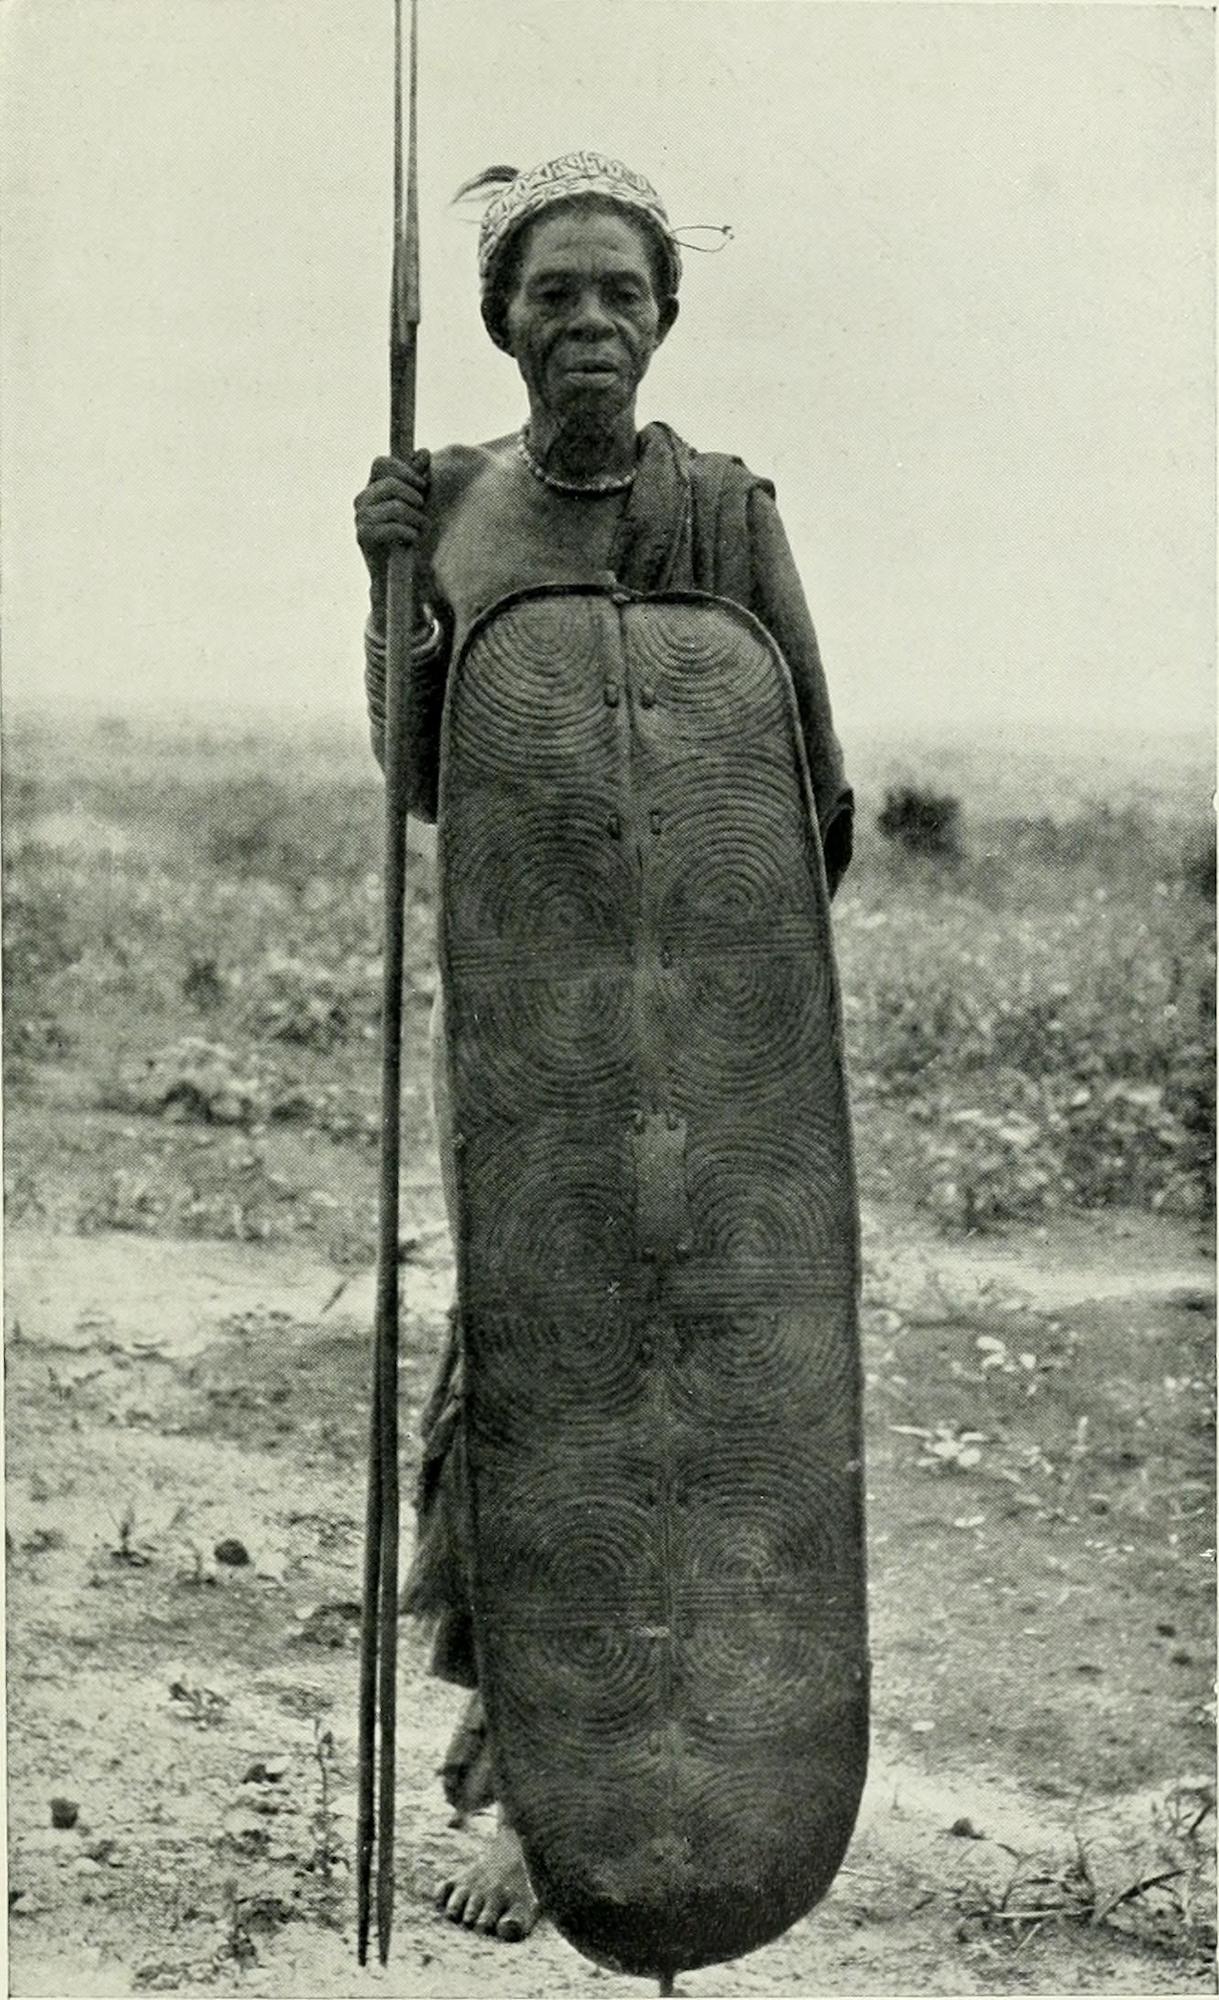 Black and white photo of man with shield and spear